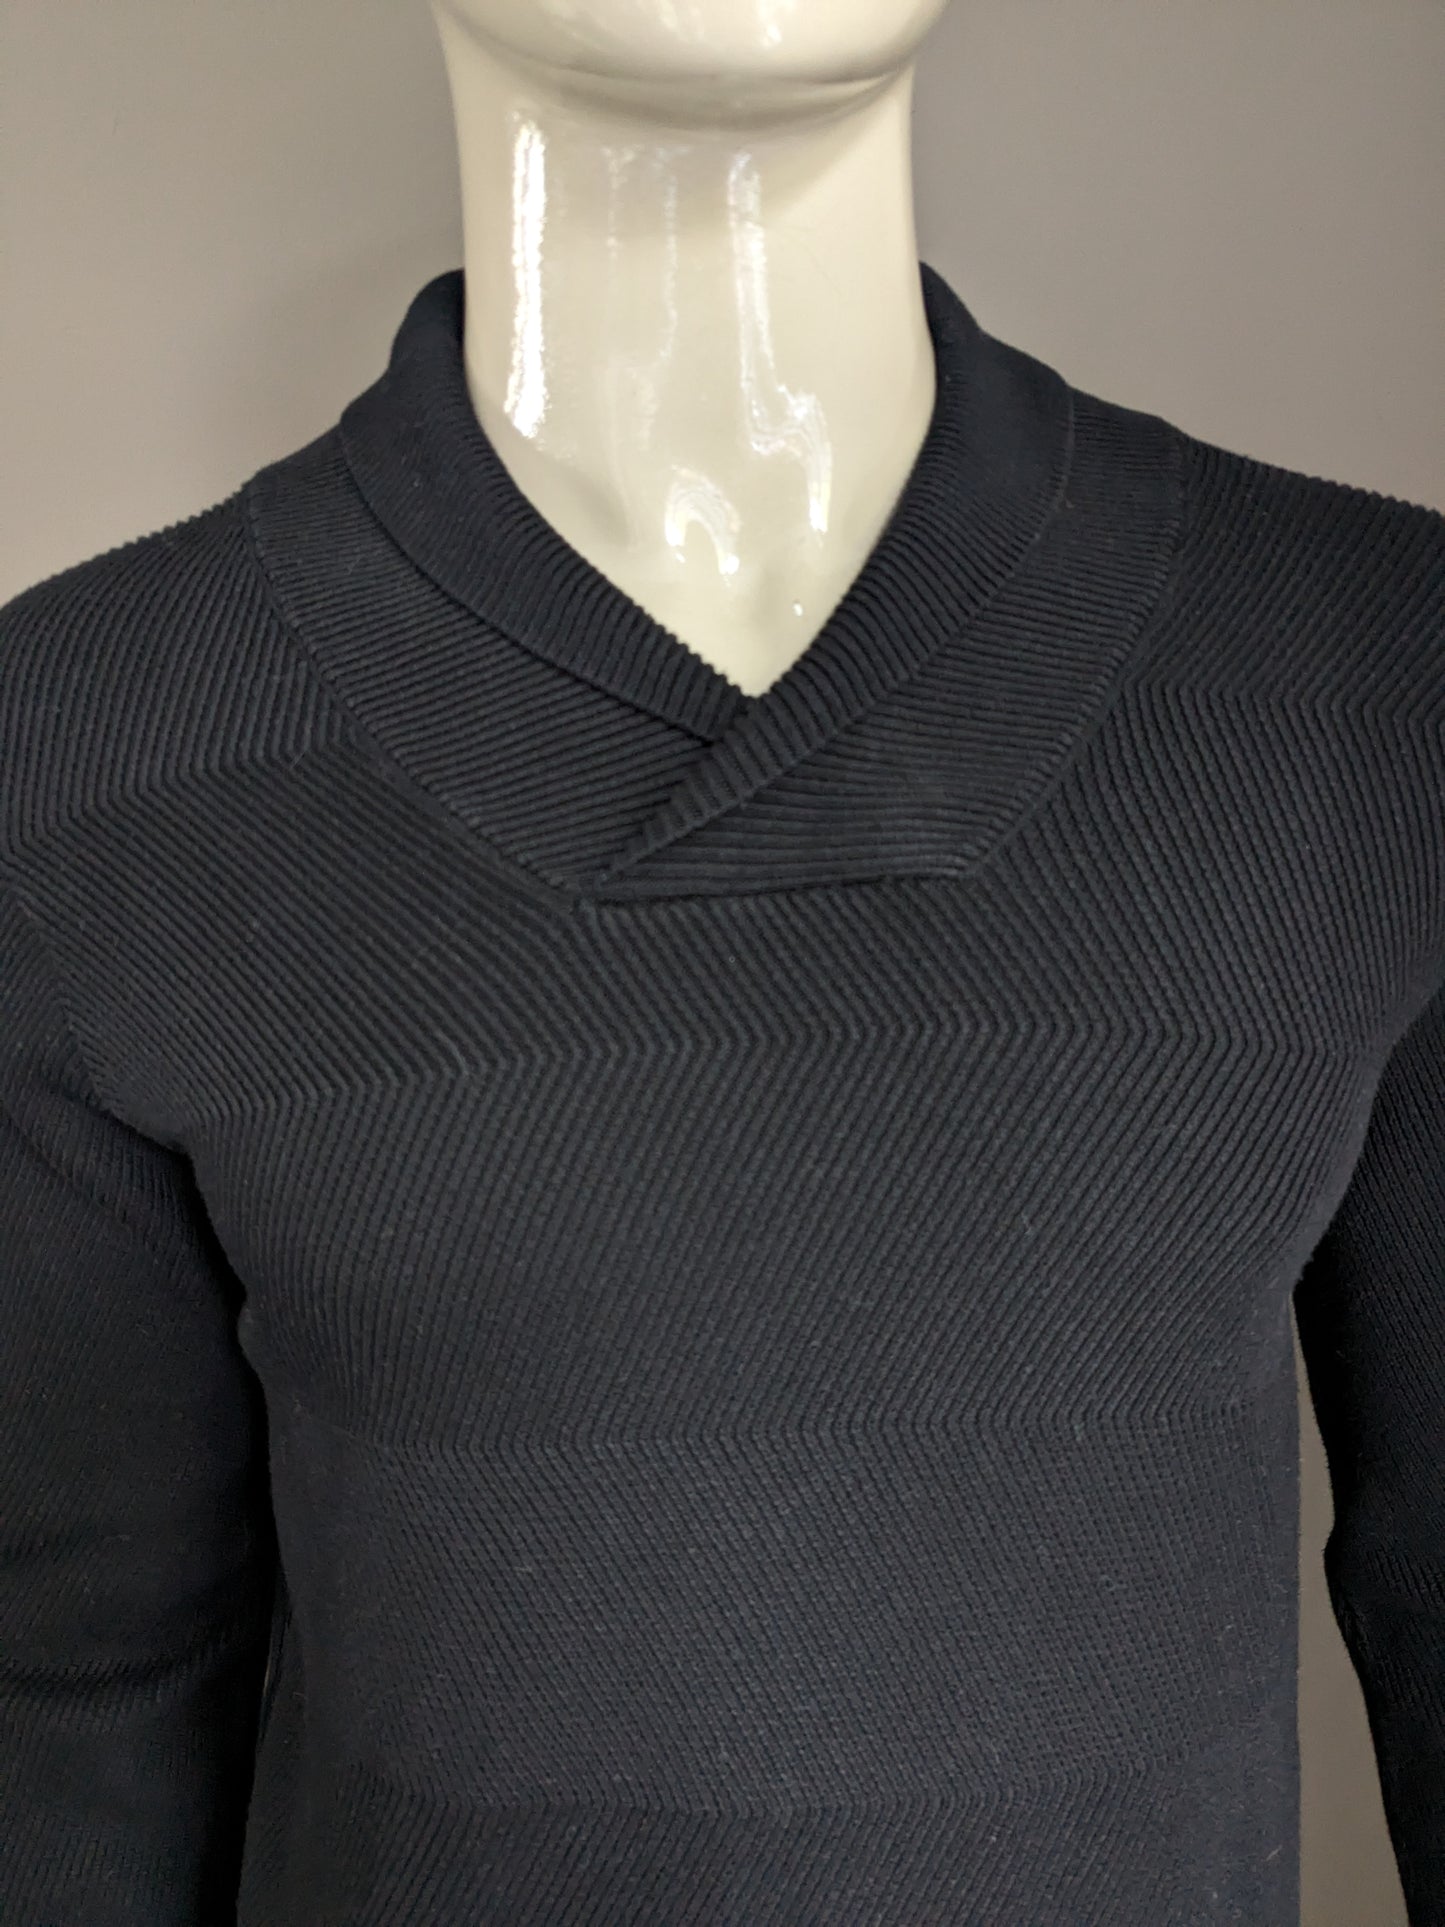 Blue industry sweater with sporty collar. Black rib motif. Size M.